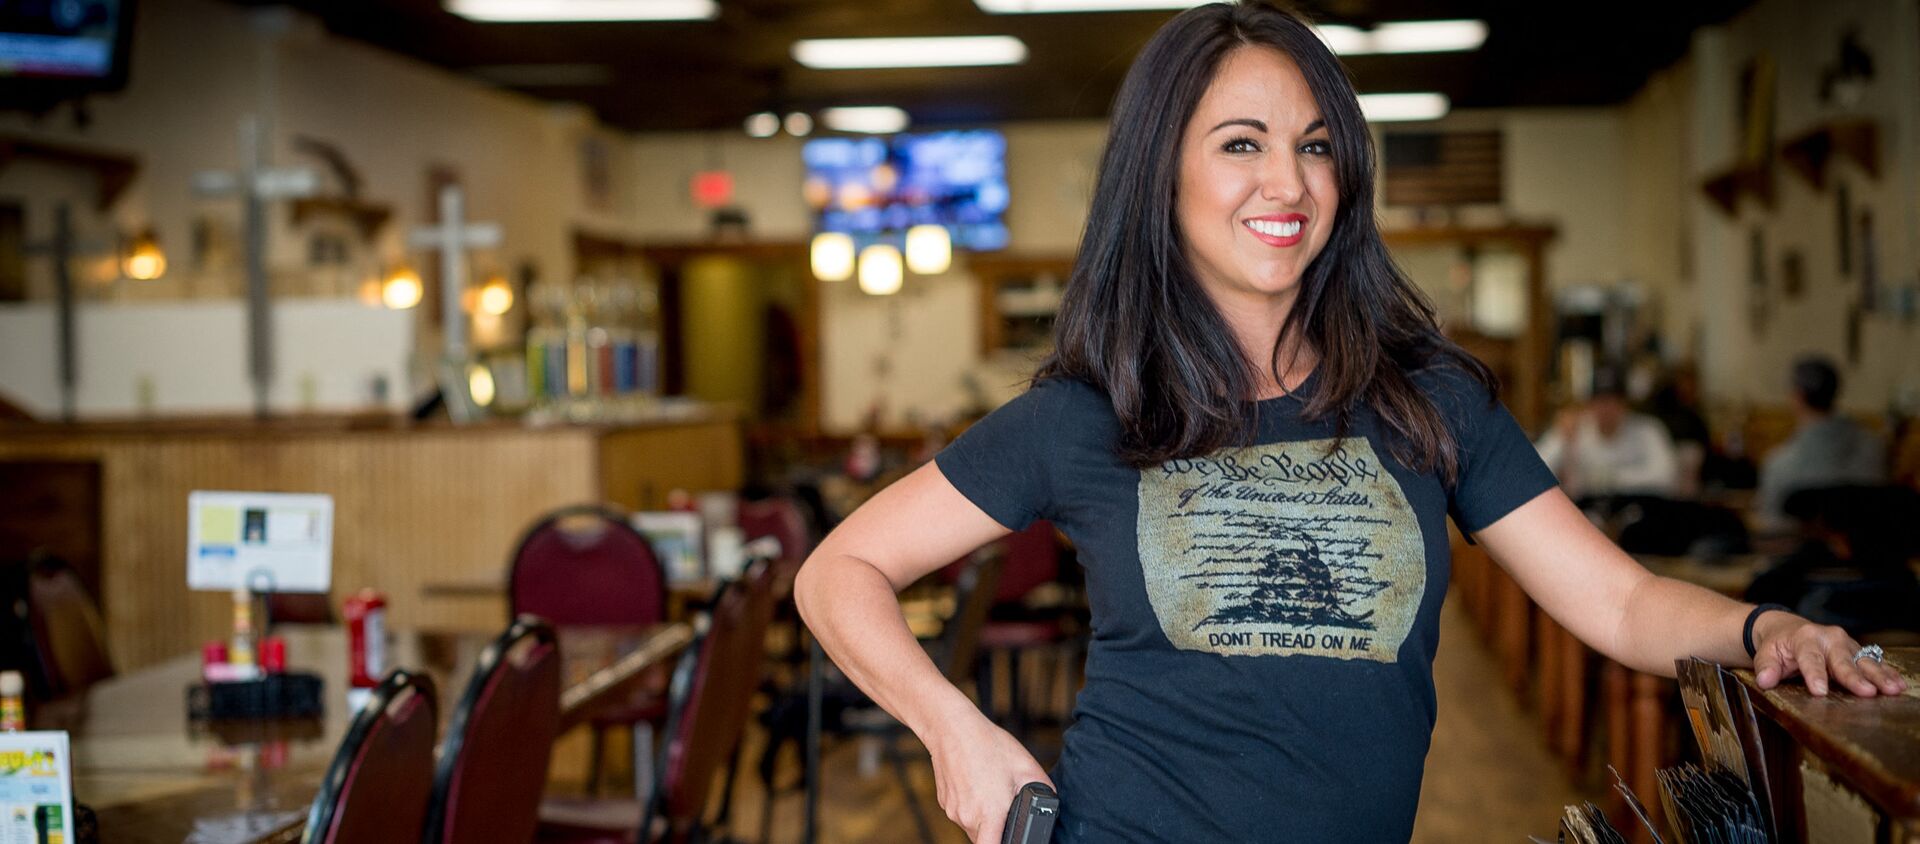 In this file photo owner Lauren Boebert poses for a portrait at Shooters Grill in Rifle, Colorado on April 24, 2018. - A Republican member of the US Congress raised eyebrows on February 18, 2021 when she appeared at a Zoom committee meeting with an arsenal of guns strategically displayed in her background. - Sputnik International, 1920, 19.02.2021